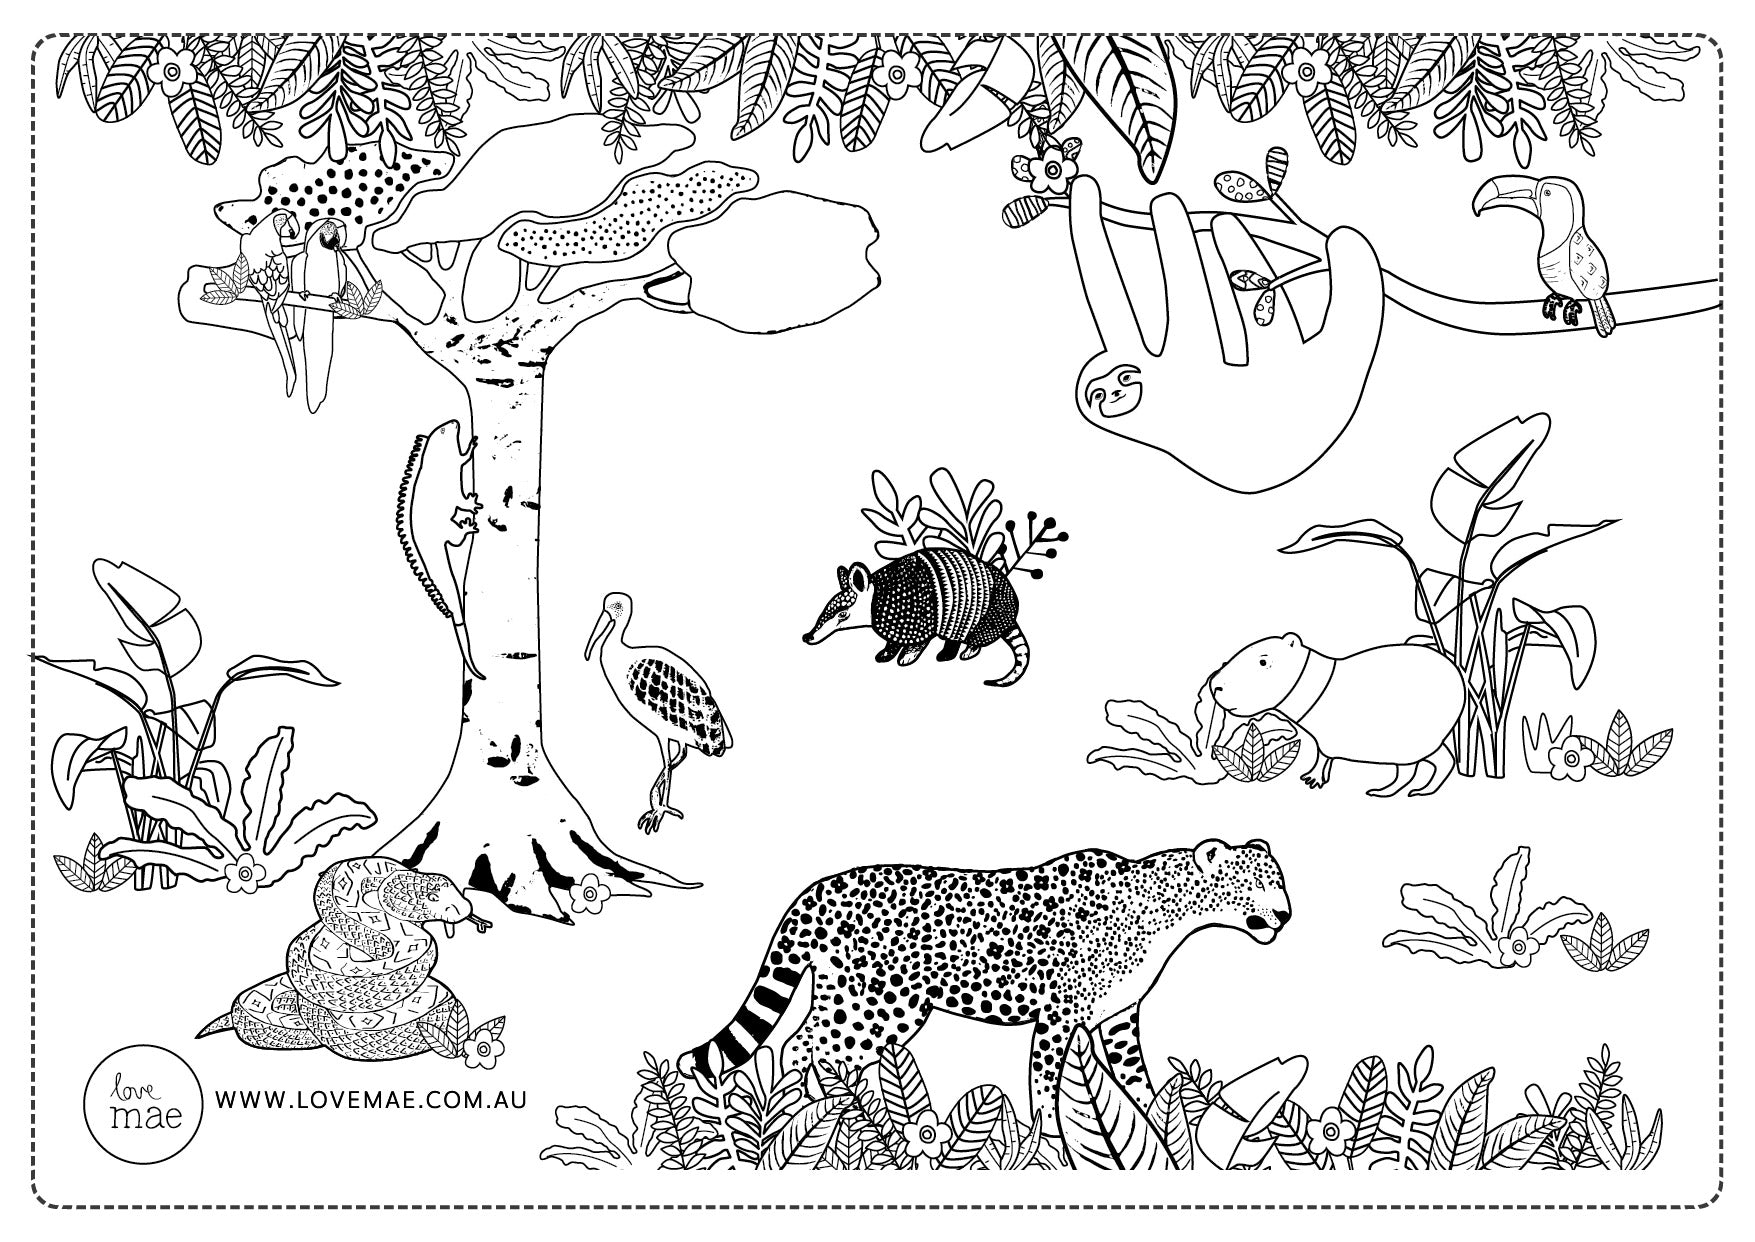 Amazon_Jungle_Animals_Forest_Nature_Illustration_Download_For_Kids_Colouring_In